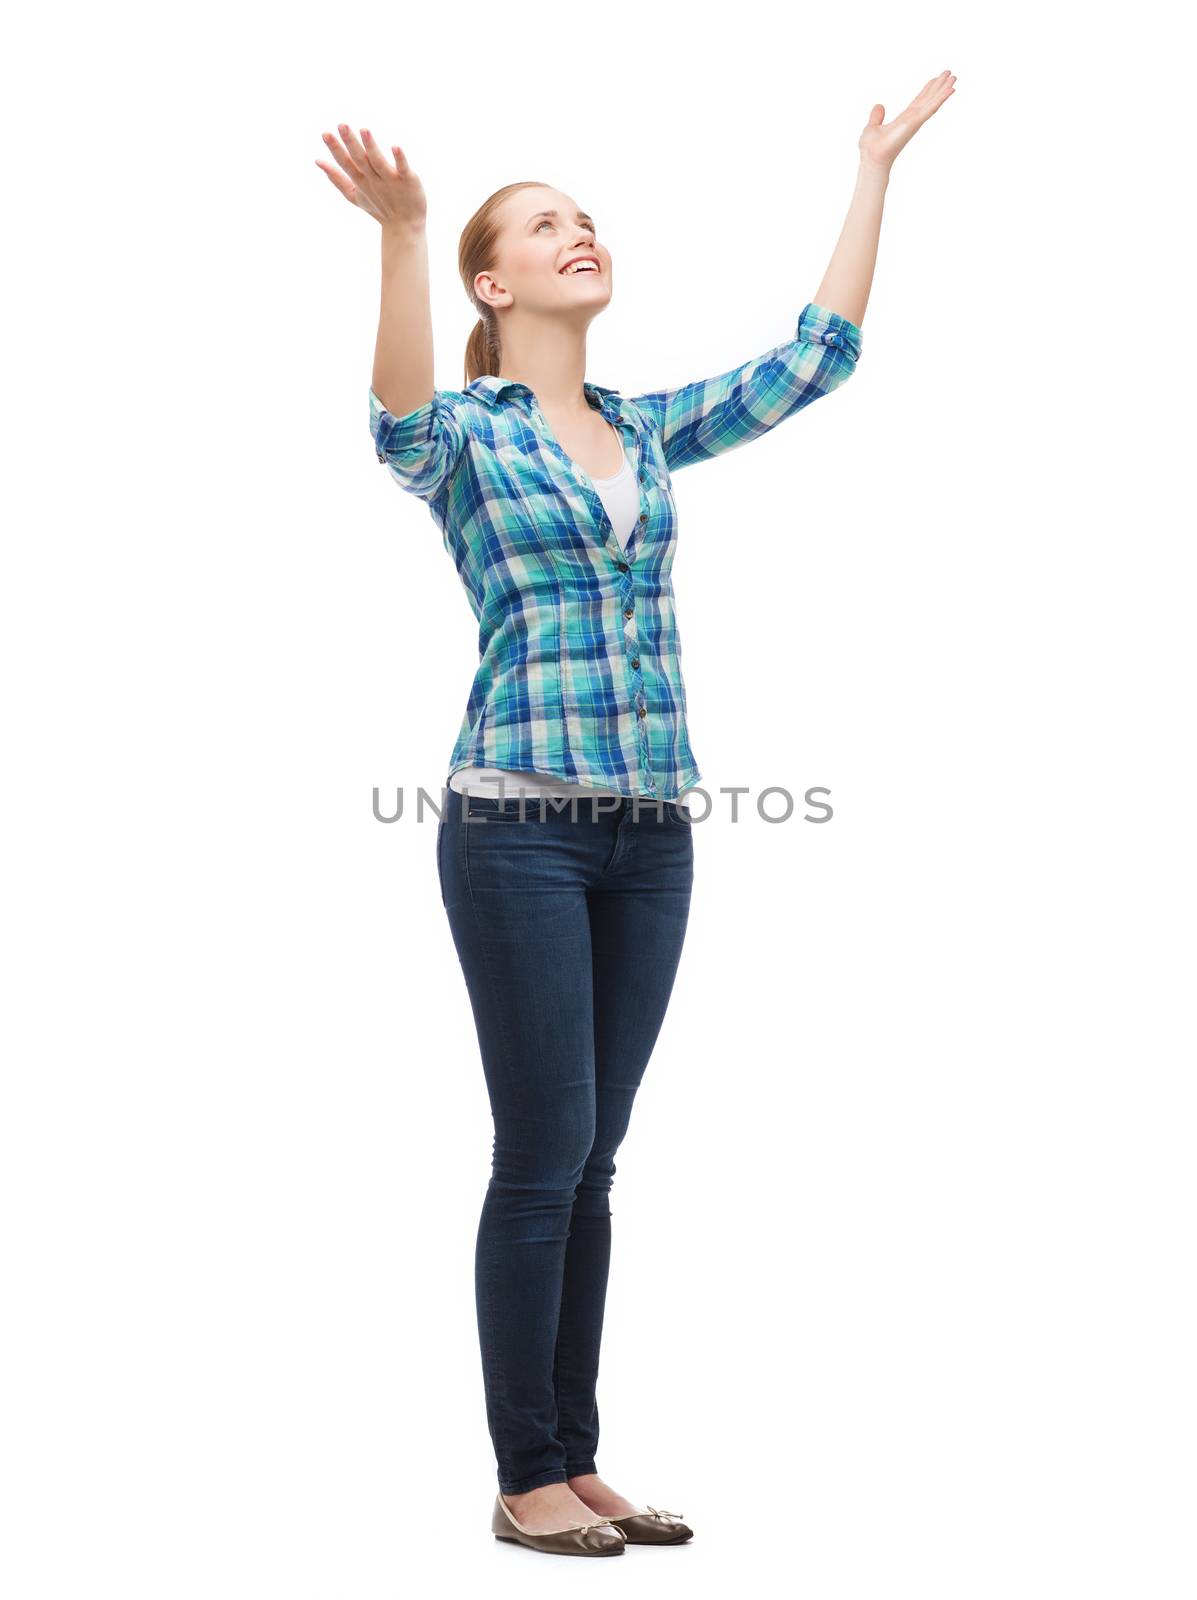 happiness and people concept - smiling young woman waving hands